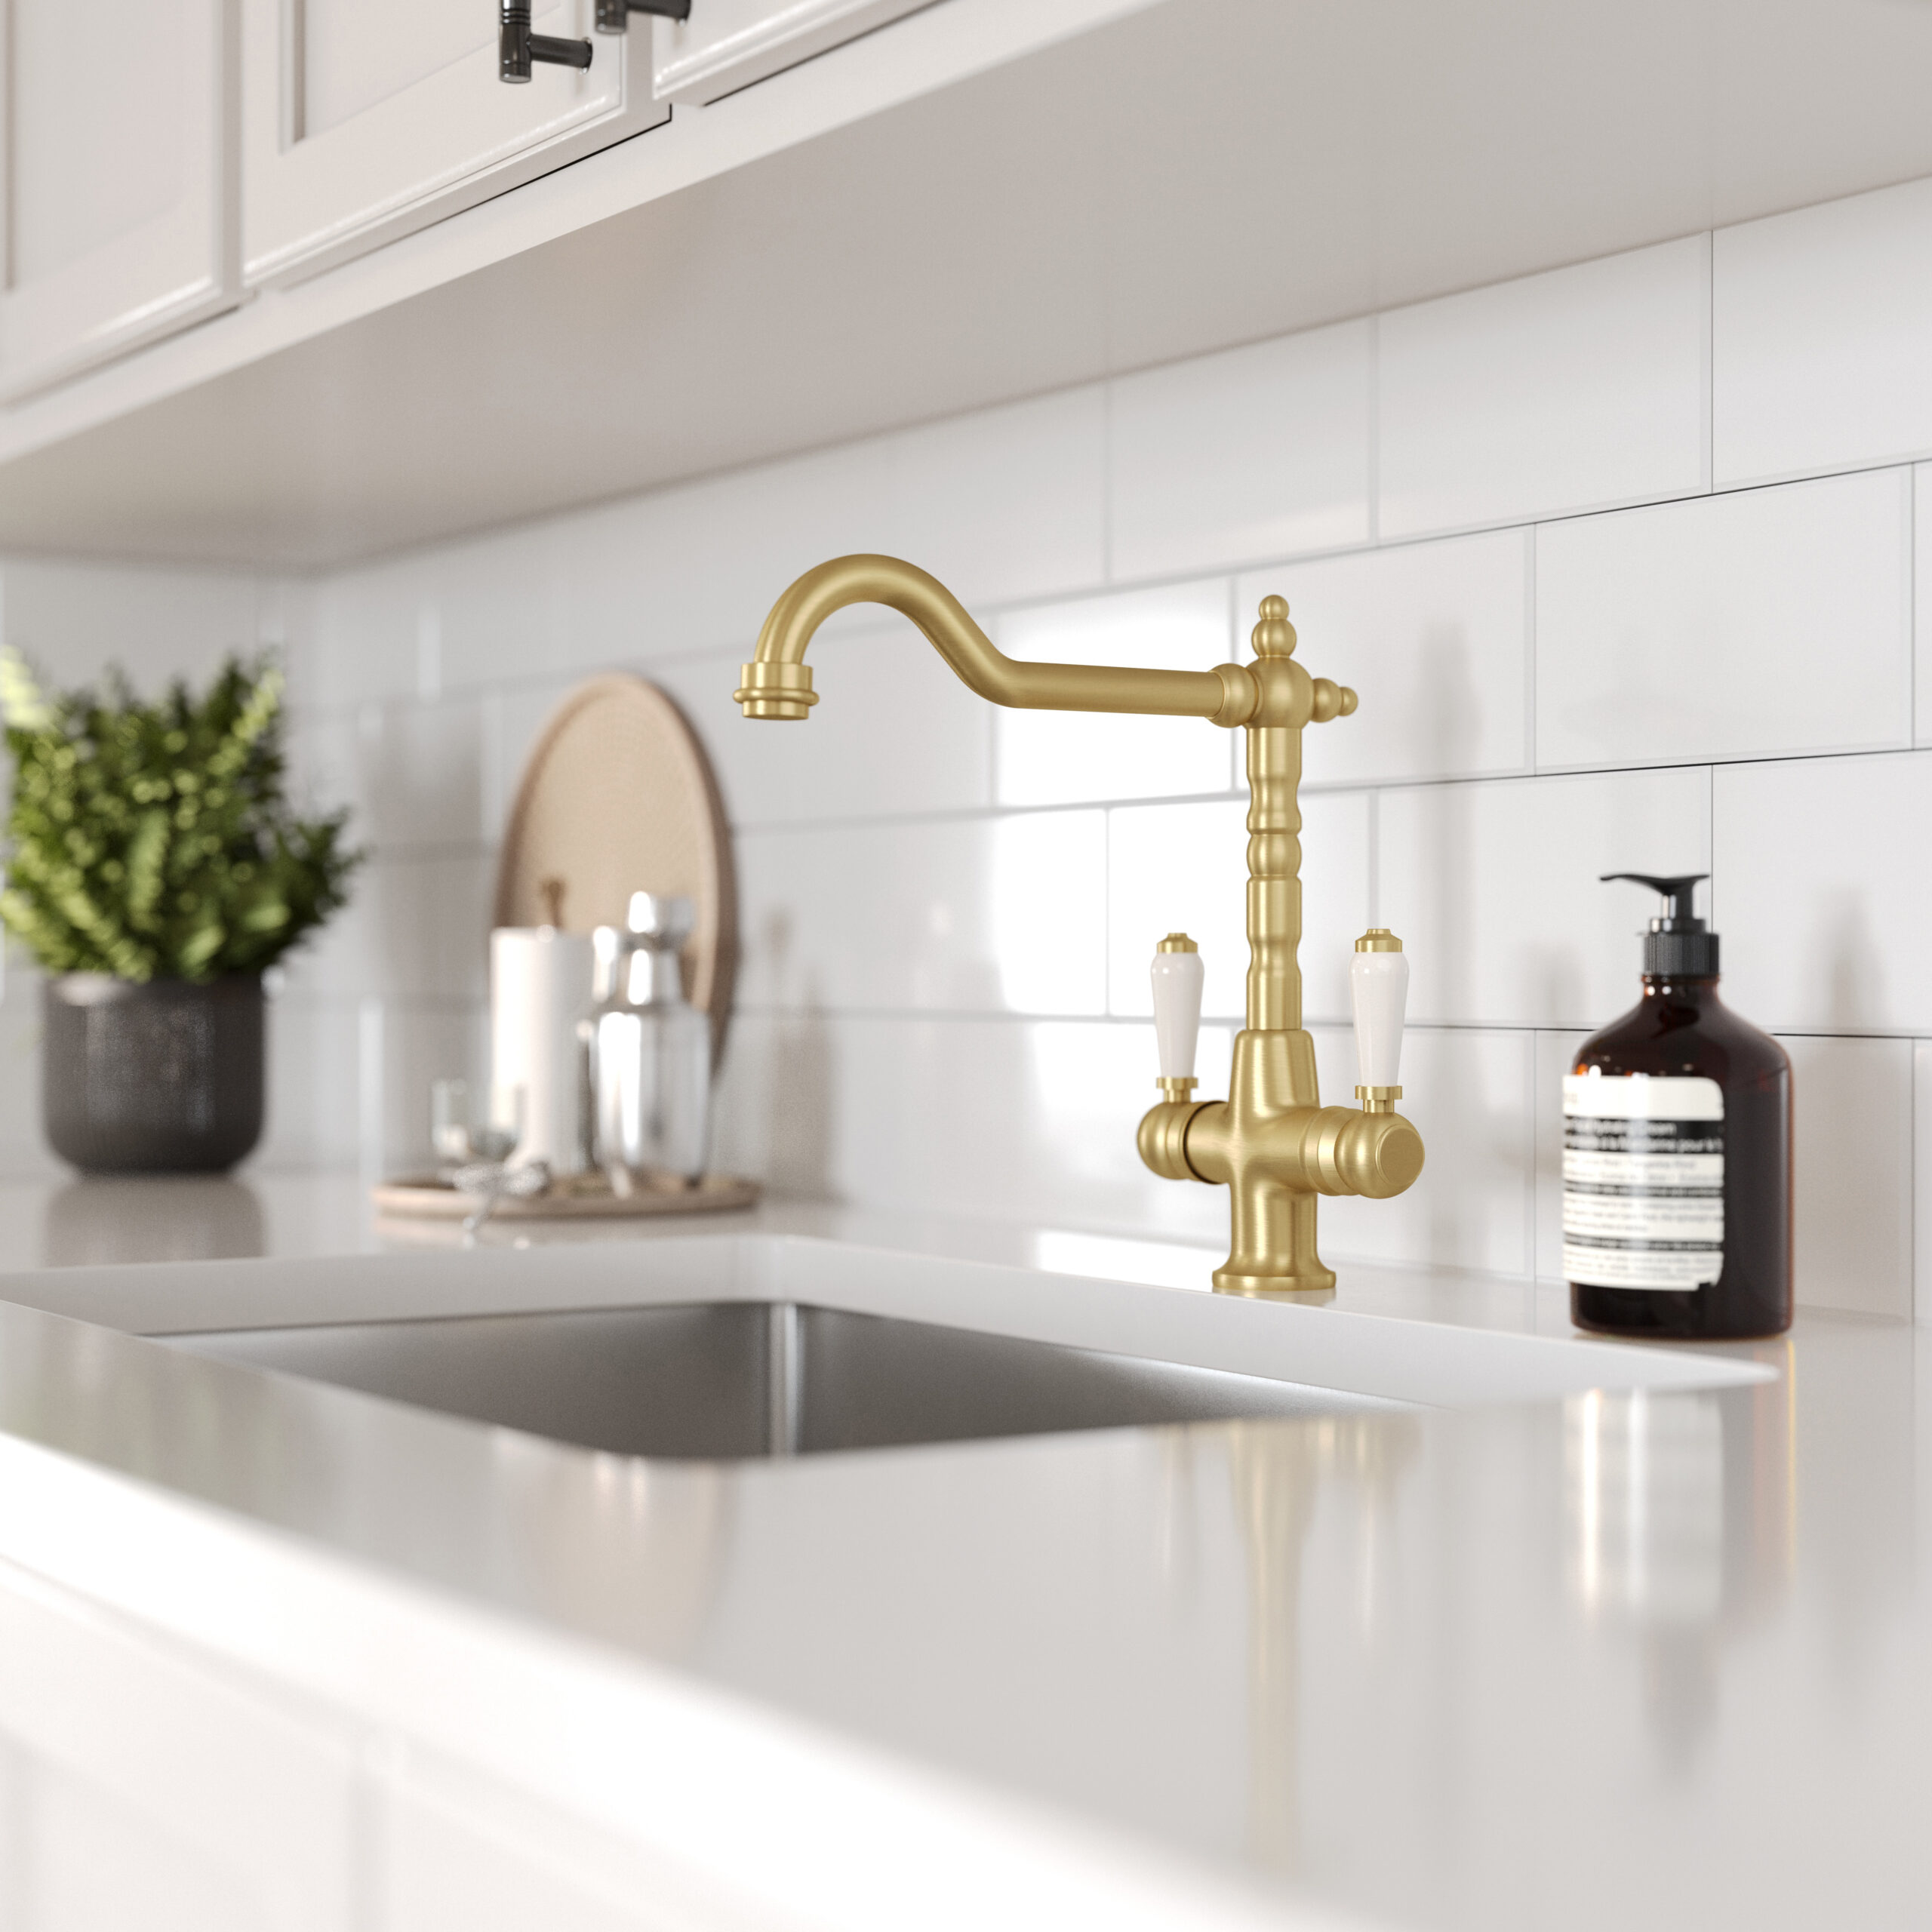 Alma brushed brass dual lever tap with white ceramic handles